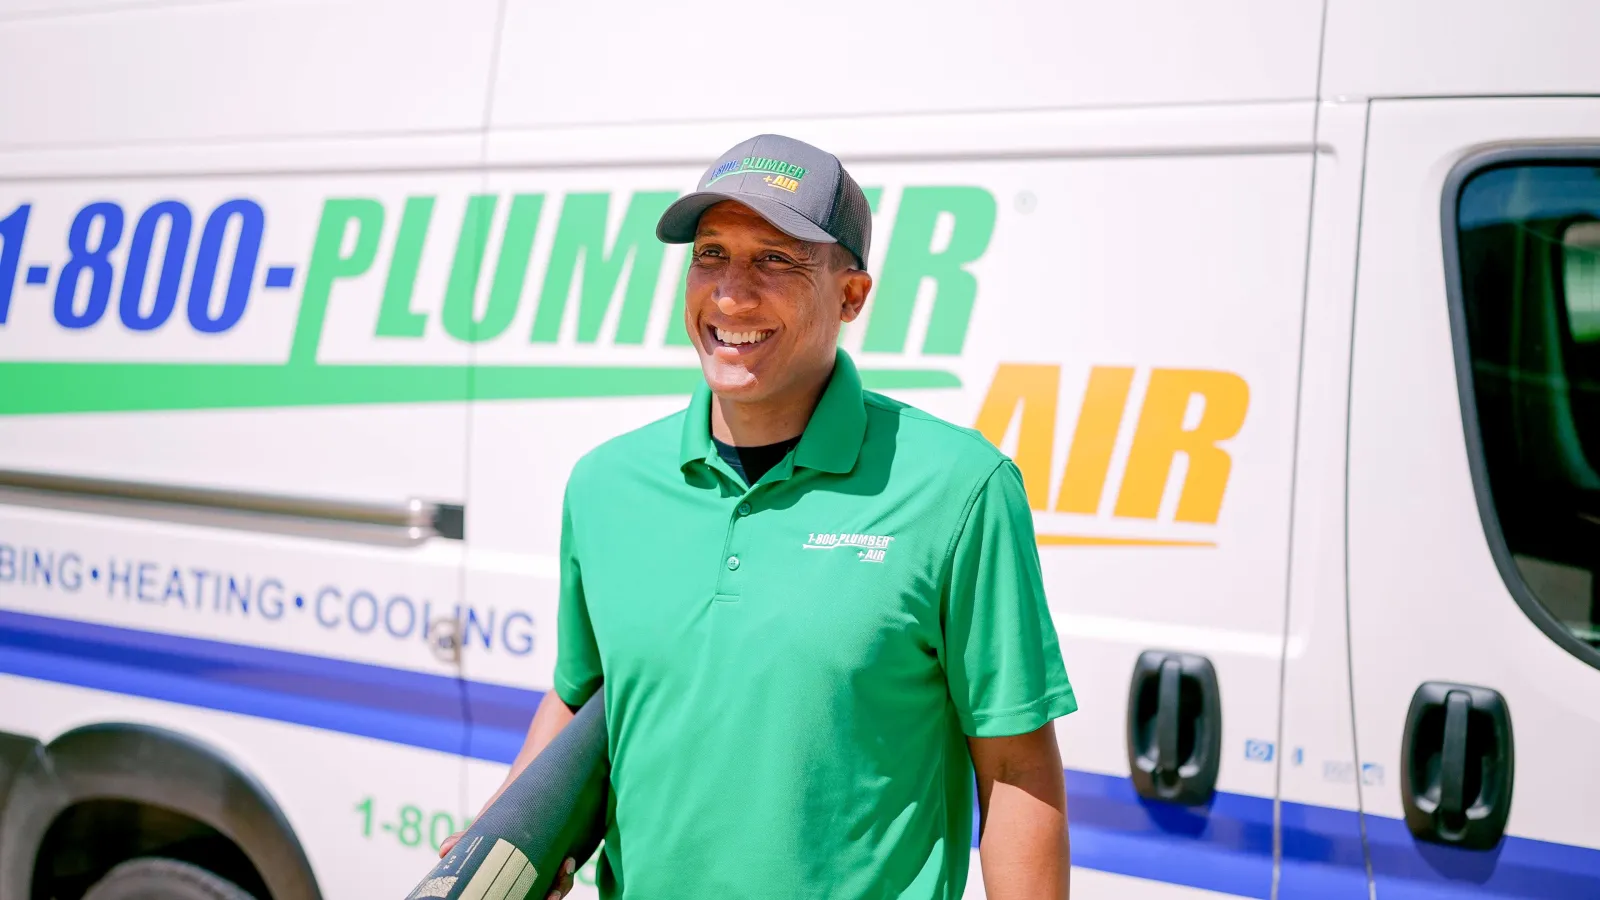 A Indianapolis commercial plumber and a van